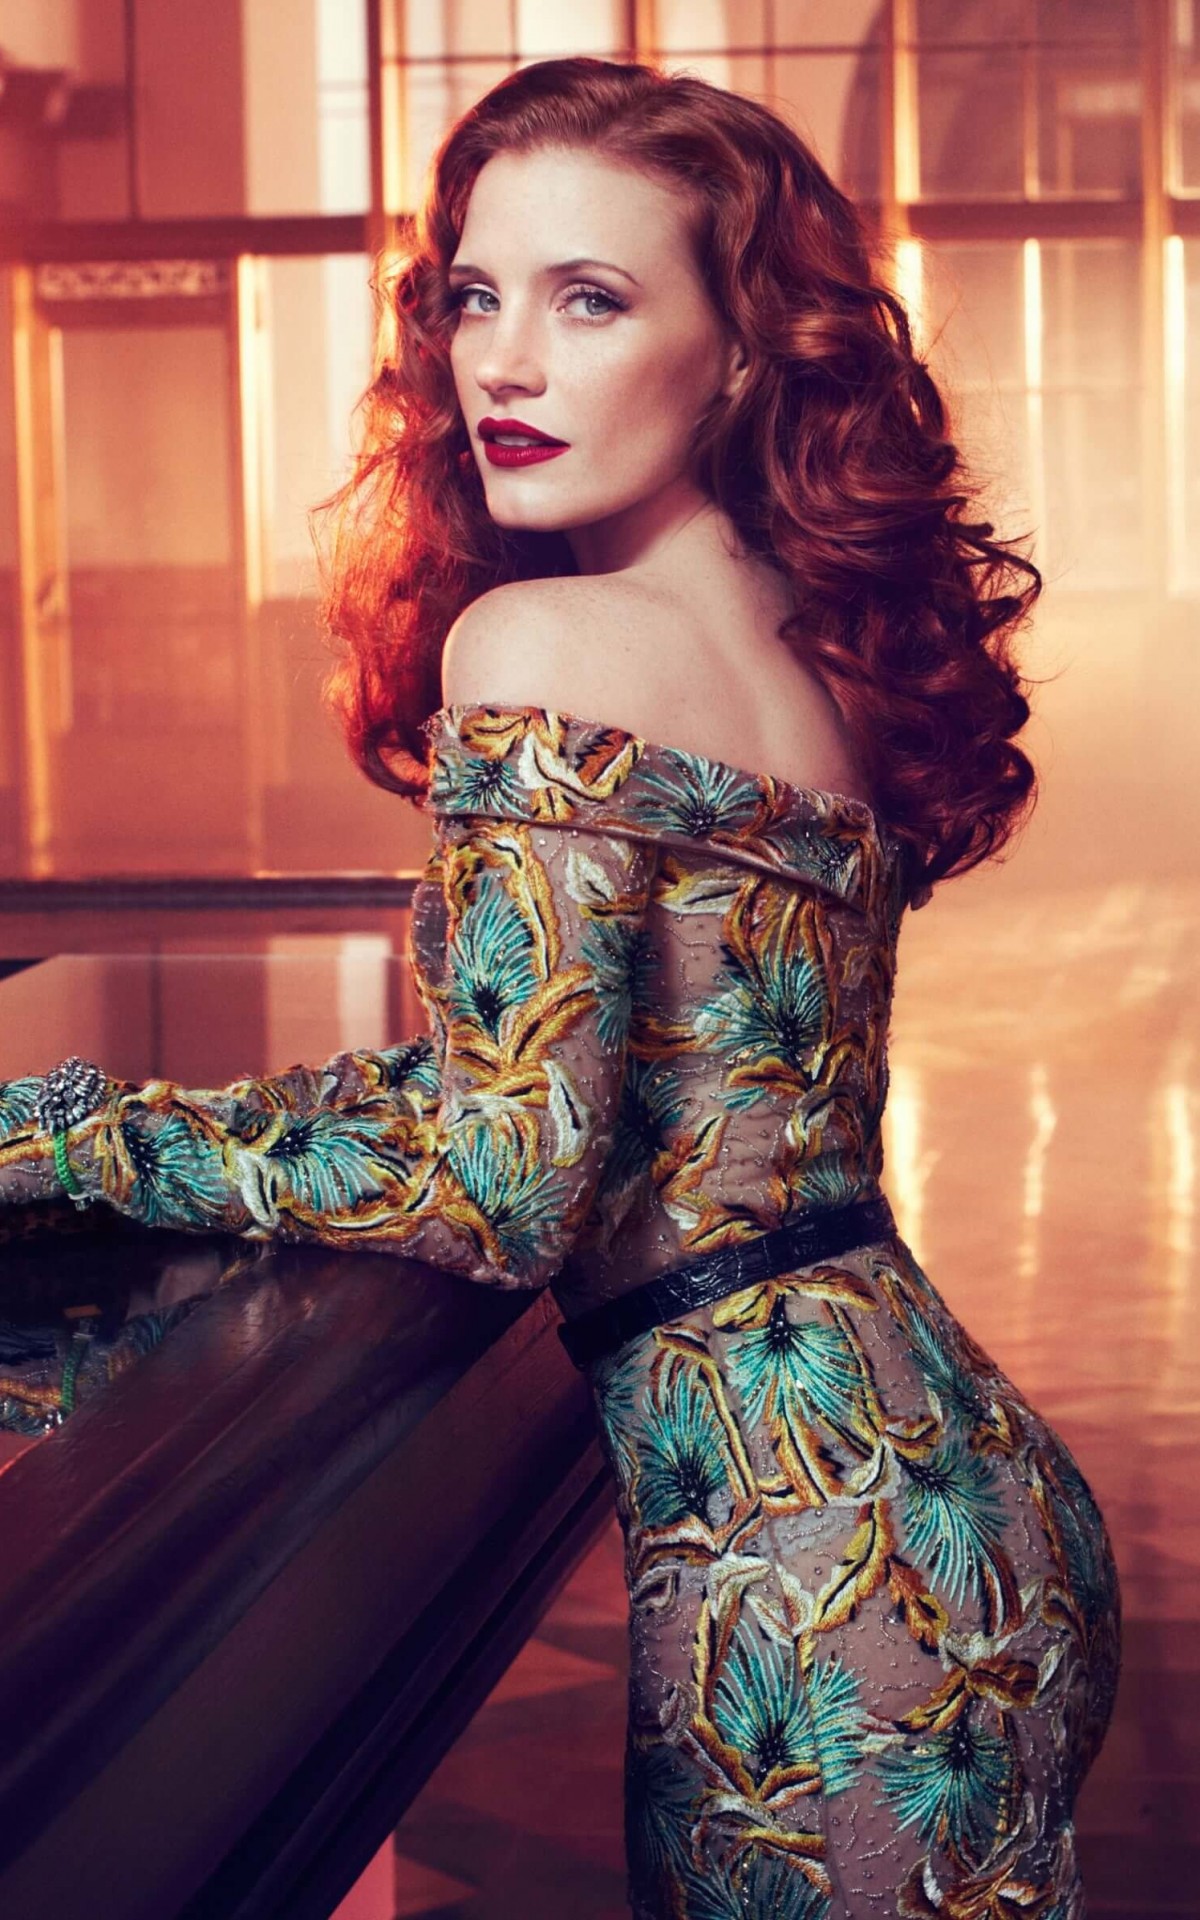 Jessica Chastain Wallpaper for Amazon Kindle Fire HDX